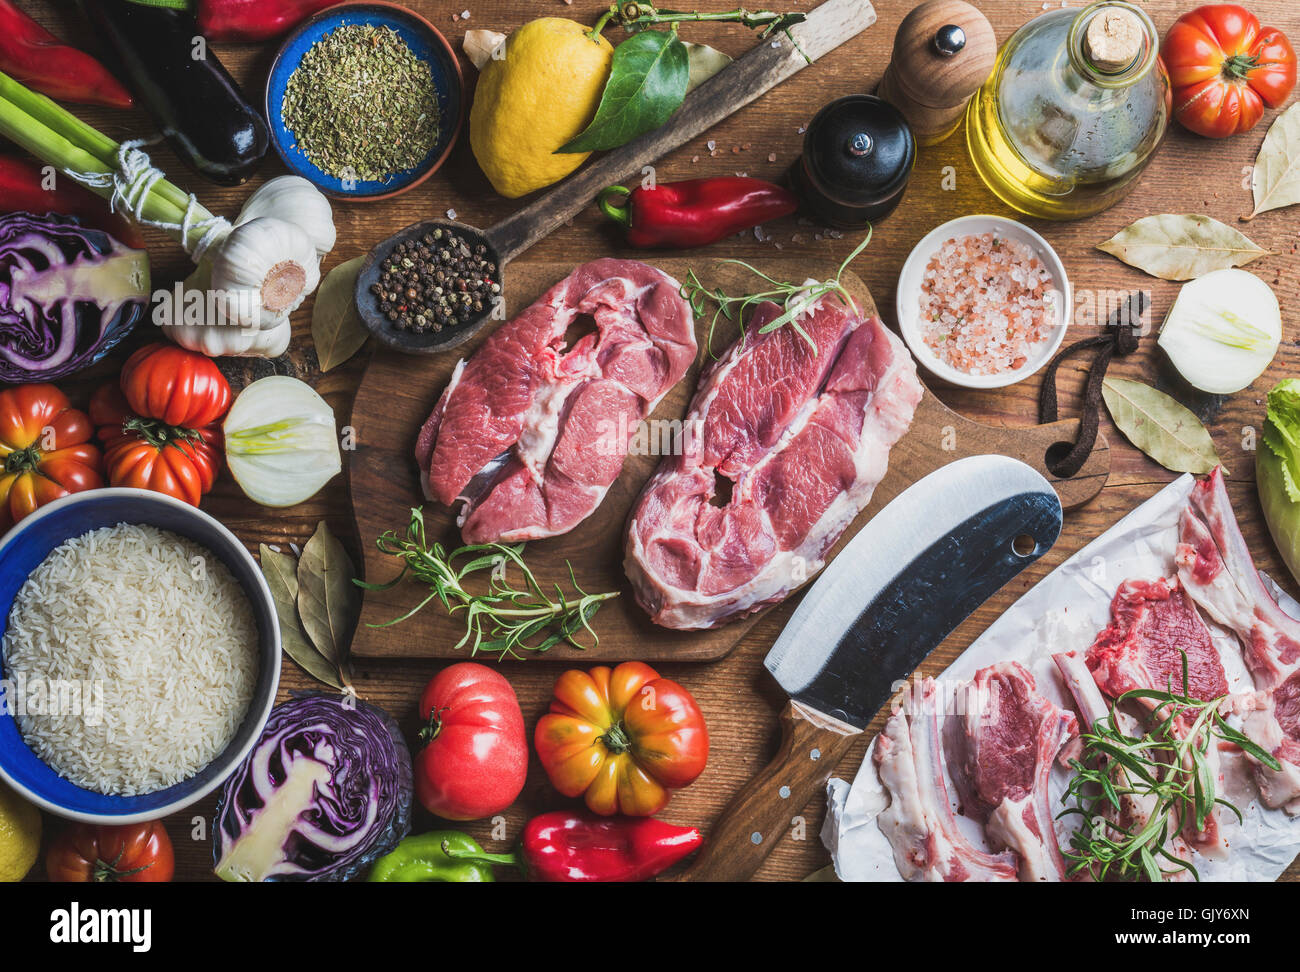 Ingredients for cooking meat dinner. Raw uncooked lamb meat assortment, rice, olive oil, spices and vegetables over wooden backg Stock Photo